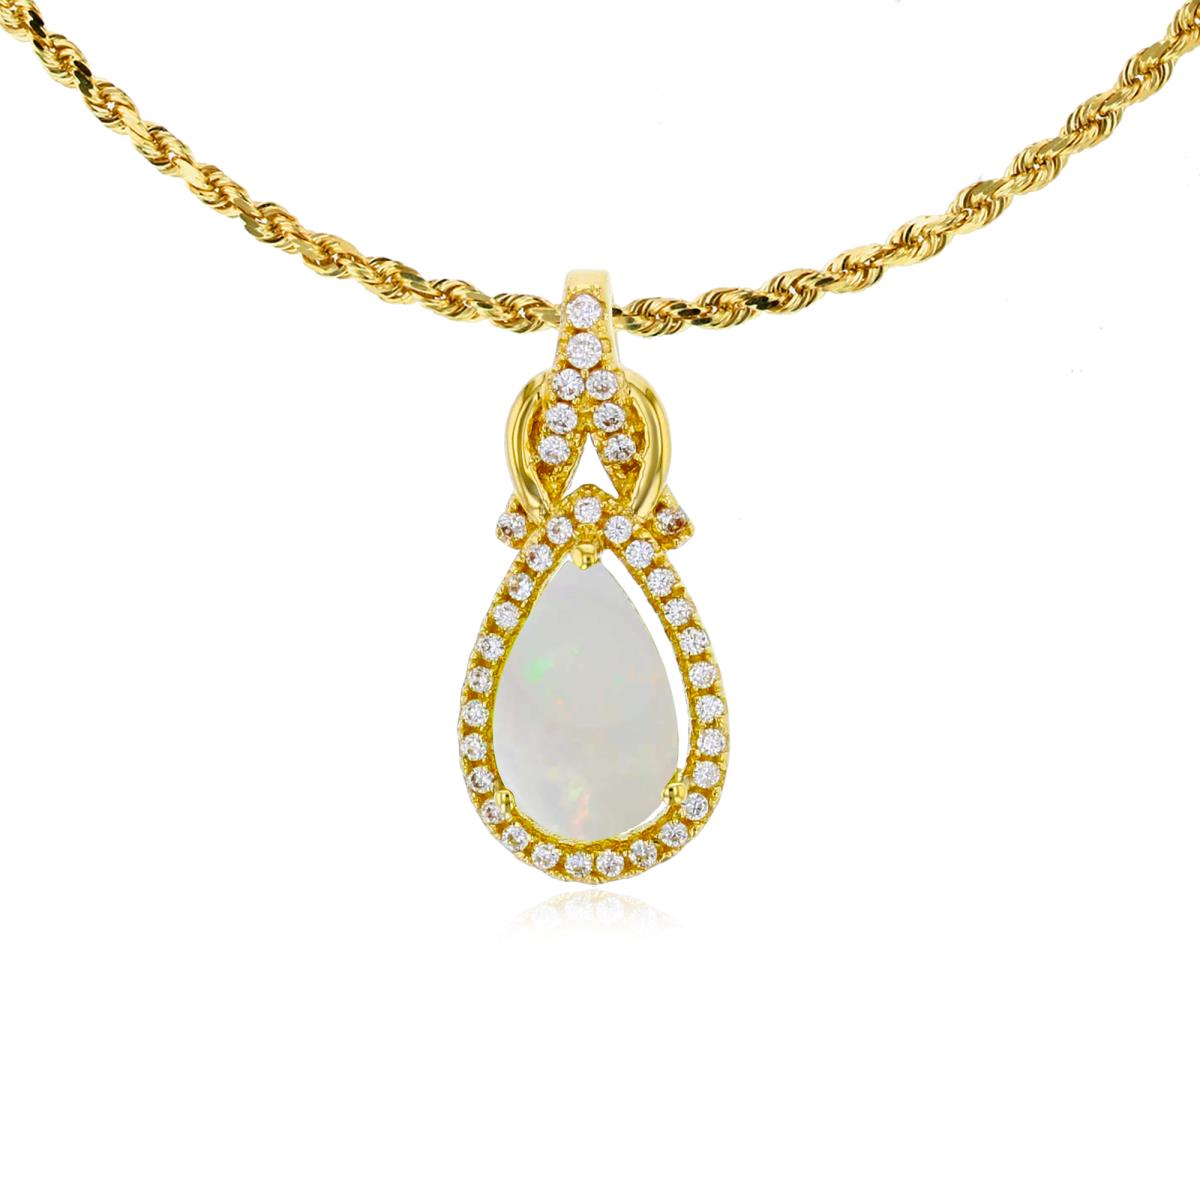 10K Yellow Gold 8x5mm Pear Cut Opal & 0.11 CTTW Rnd Diamond Knot 18" Rope Chain Necklace